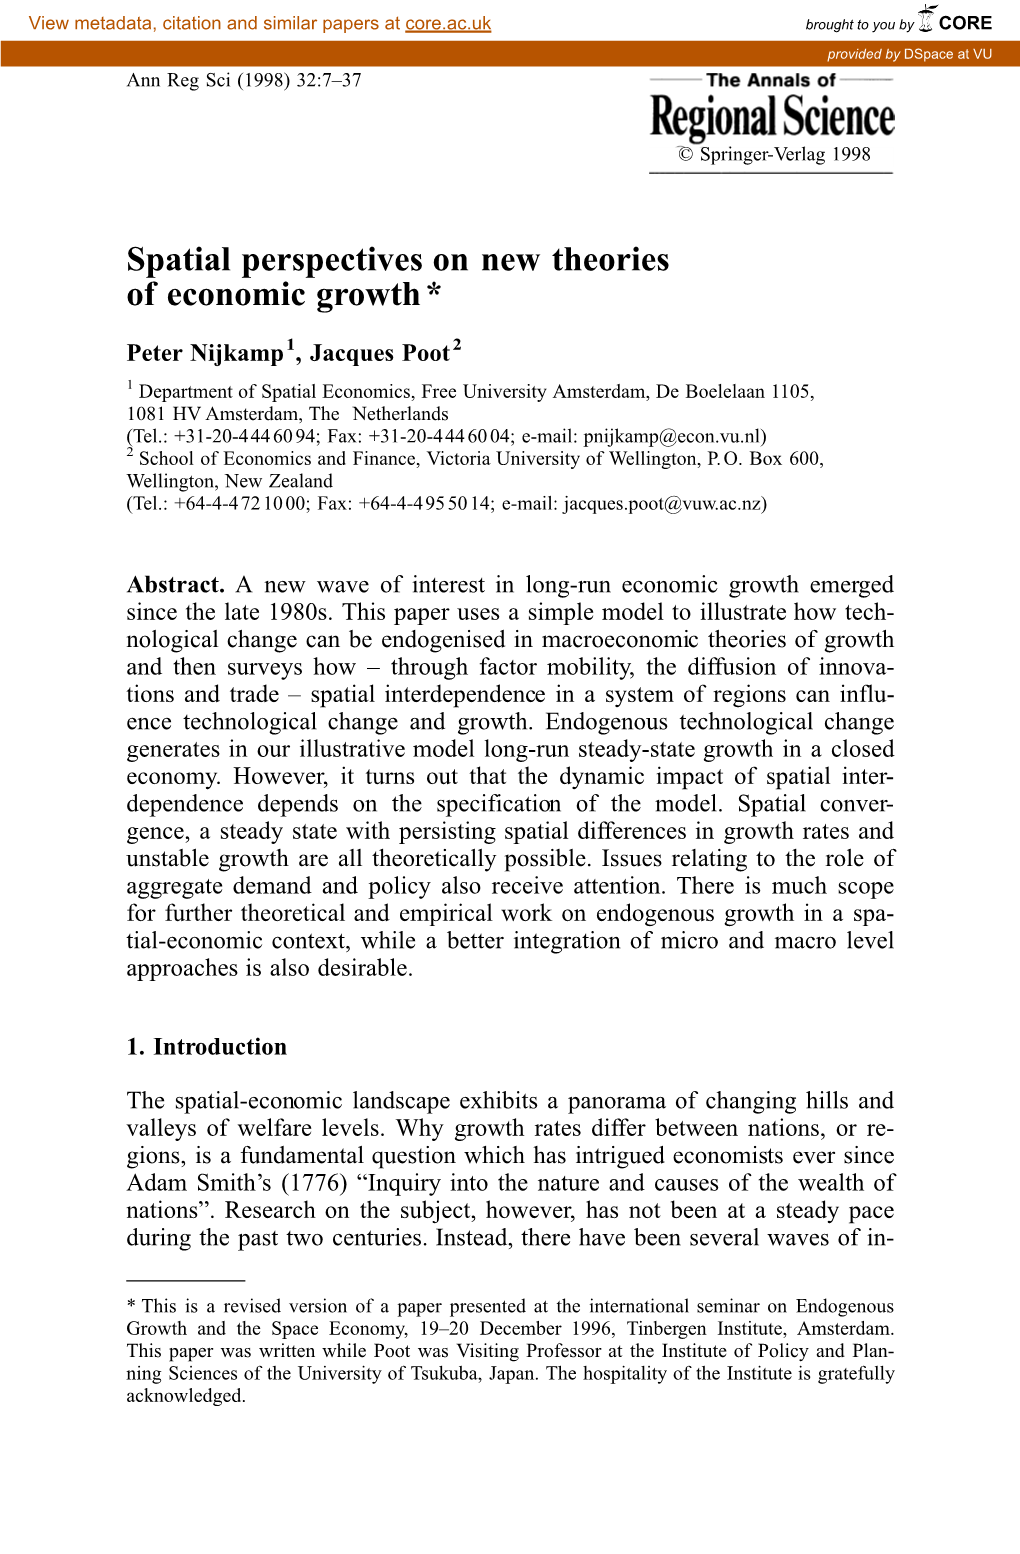 Spatial Perspectives on New Theories of Economic Growth*